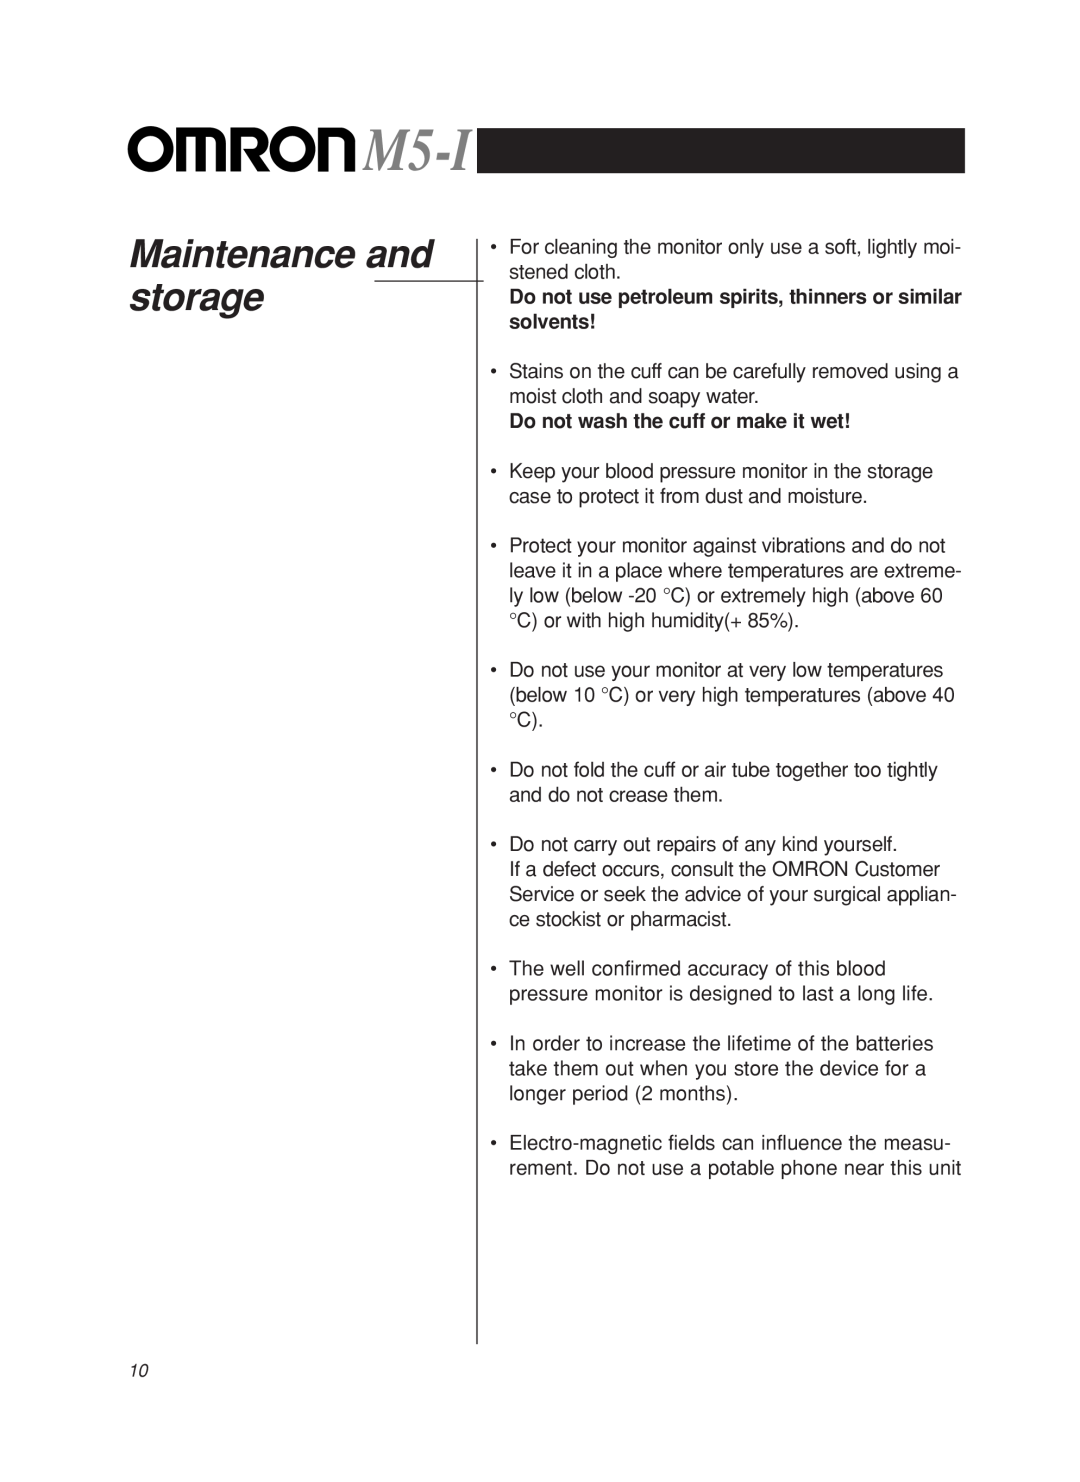 Omron M5-I instruction manual Maintenance and storage, Do not use petroleum spirits, thinners or similar solvents 